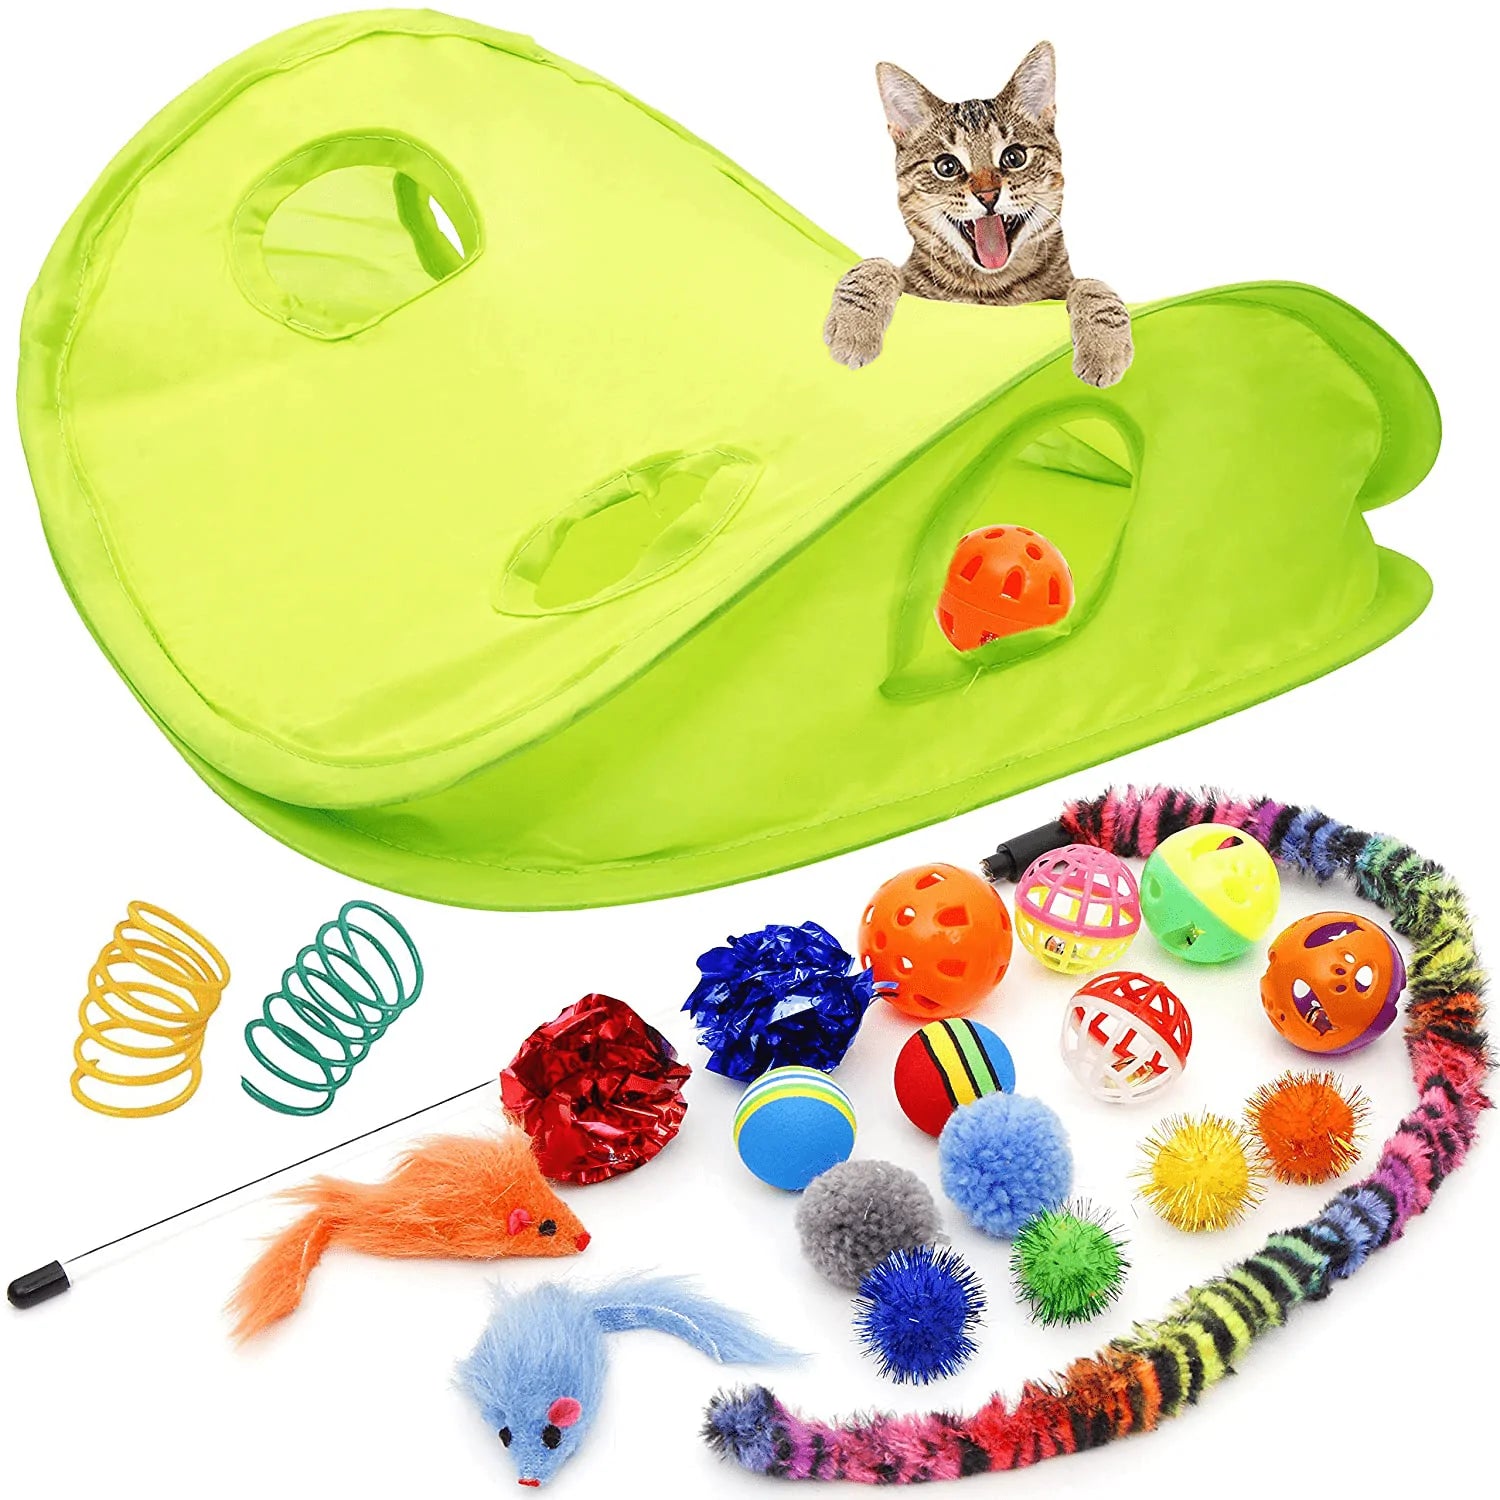 Youngever 18 Cat Toys Kitten Toys Assortments, Cat Teaser Wand, Interactive Bell Toy, Sparkle Balls for Cat, Puppy, Kitty, Kitten Animals & Pet Supplies > Pet Supplies > Cat Supplies > Cat Toys Youngever LLC with Hide Seek Toy  